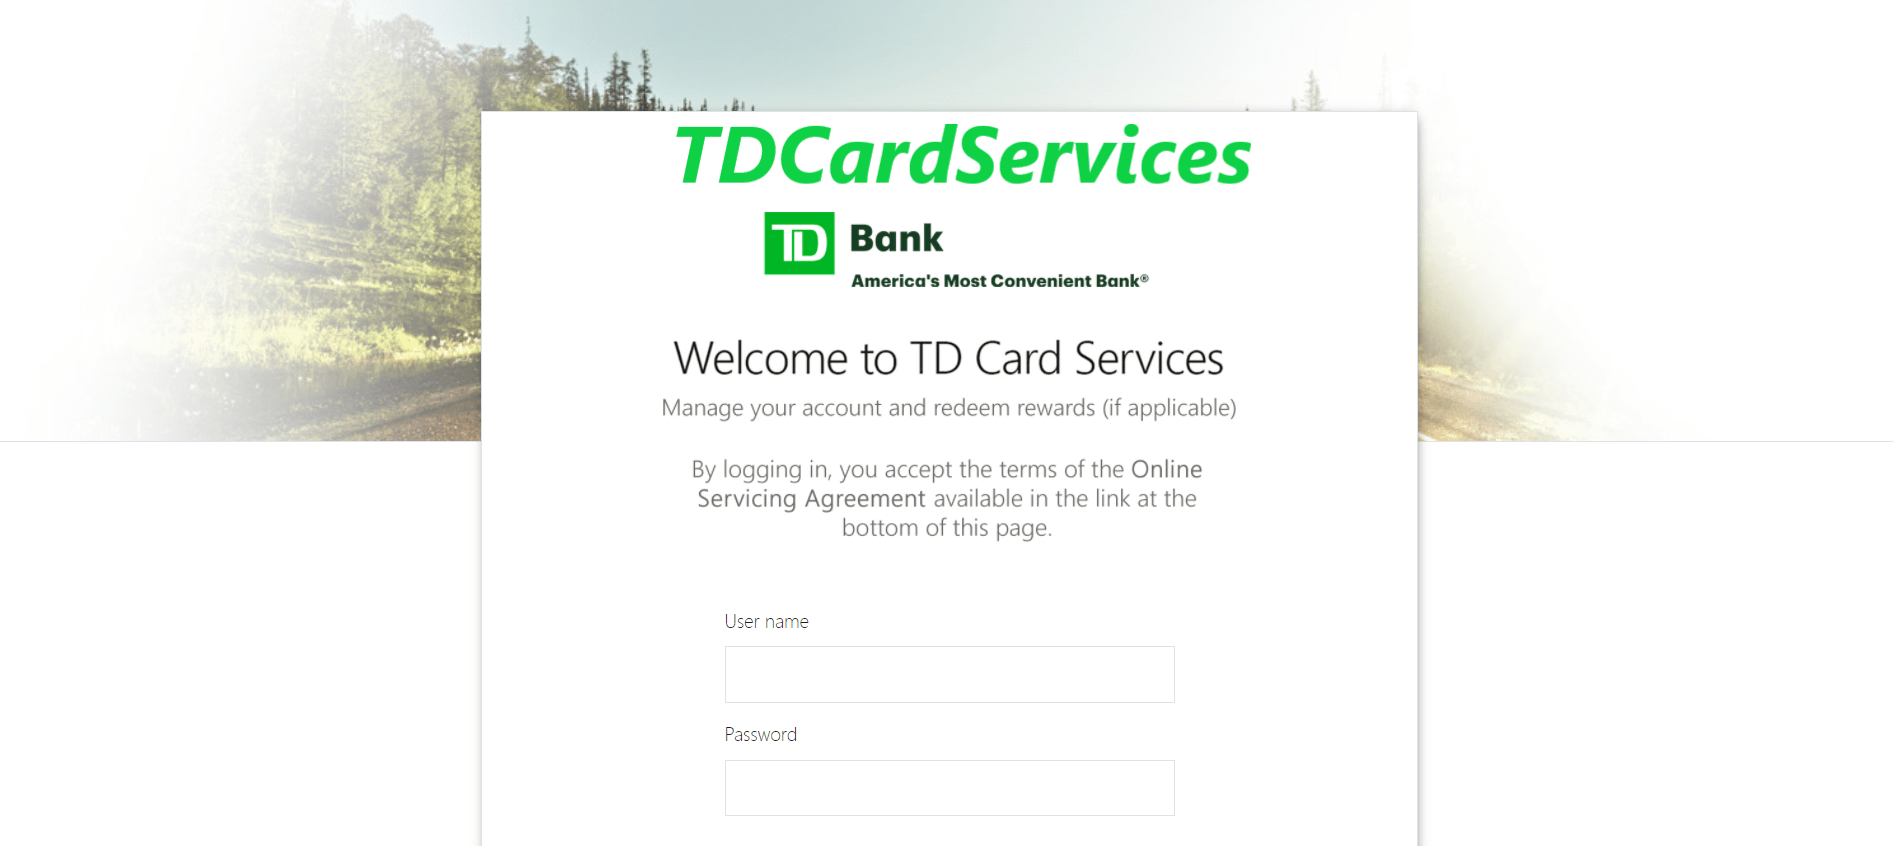 TDCardServices login details, including username and password, with the blurred background of trees and road.